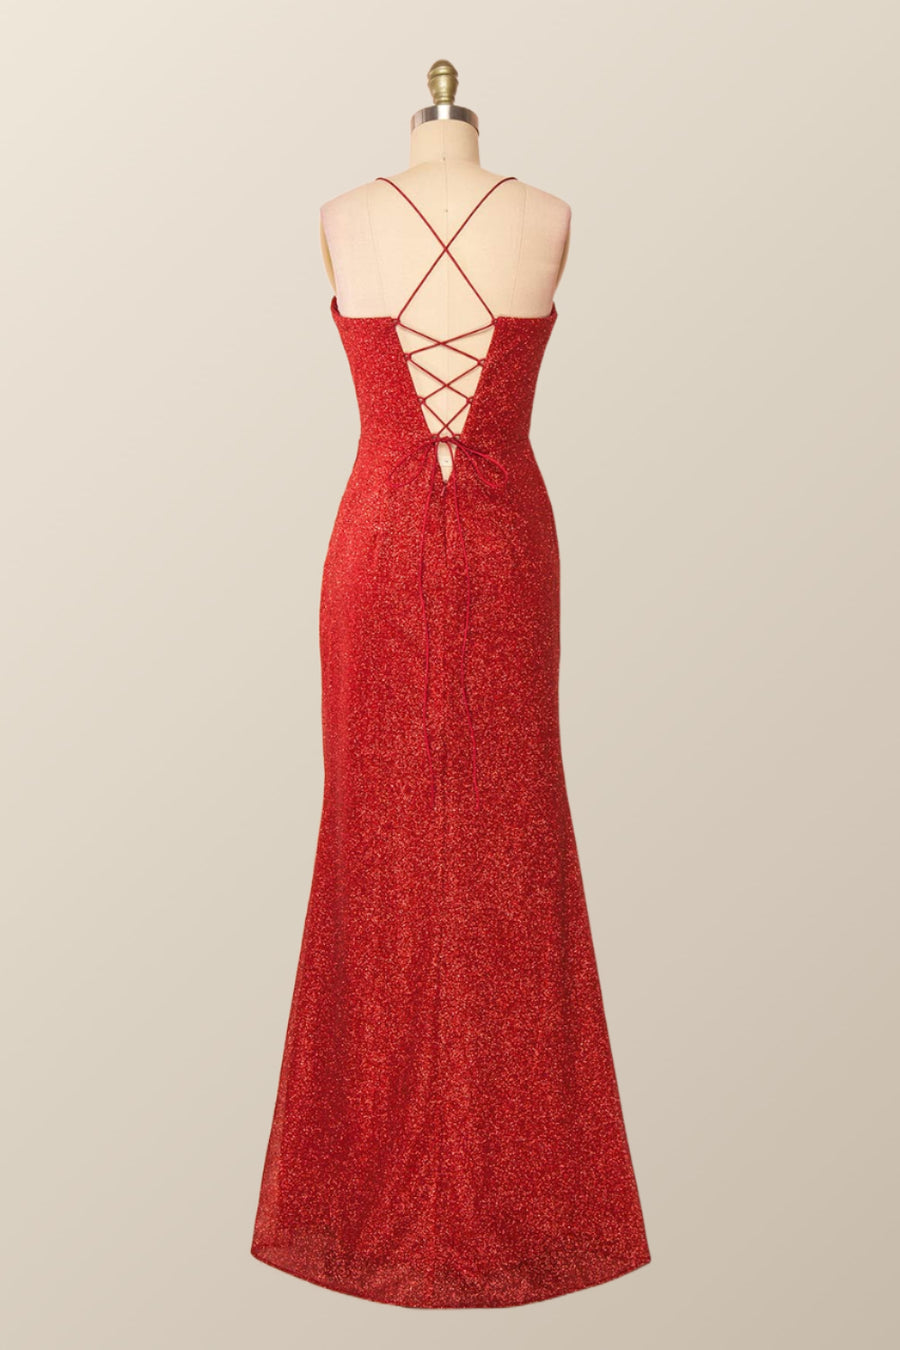 Fitted Red Cowl Neck Long Party Dress with Slit